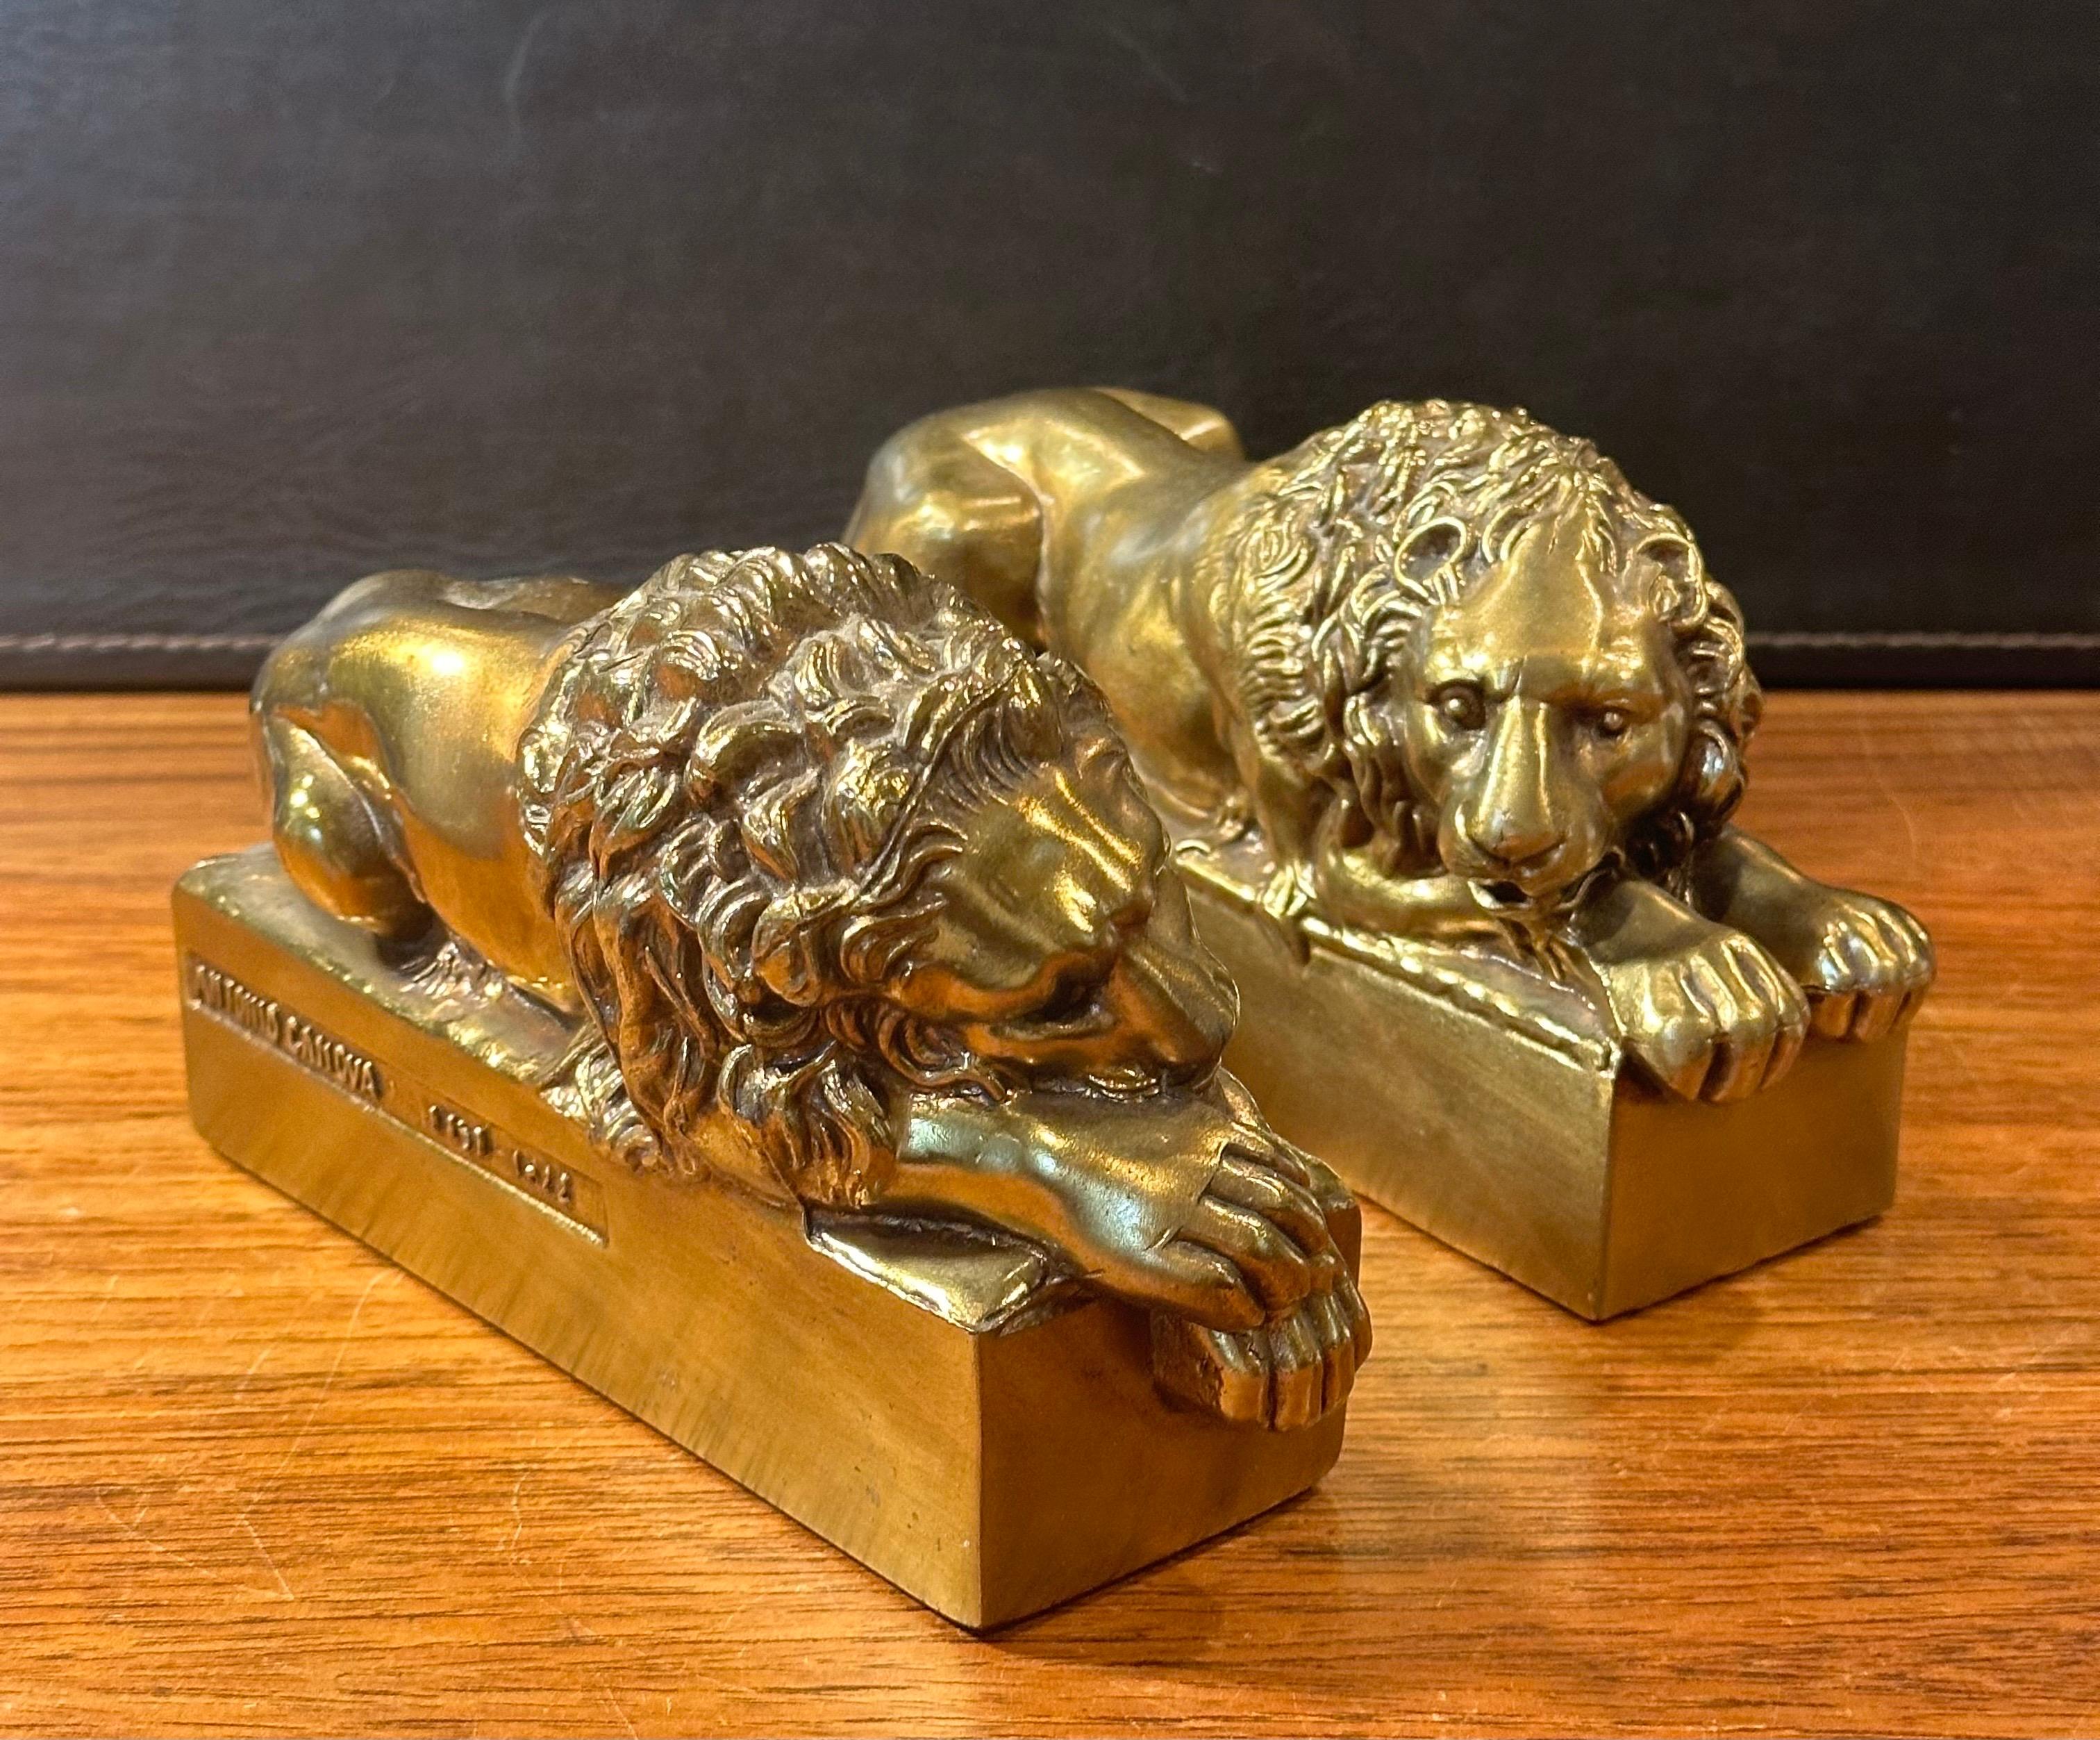 Polished Pair of Cast Brass Lion Bookends by Antonio Canova 